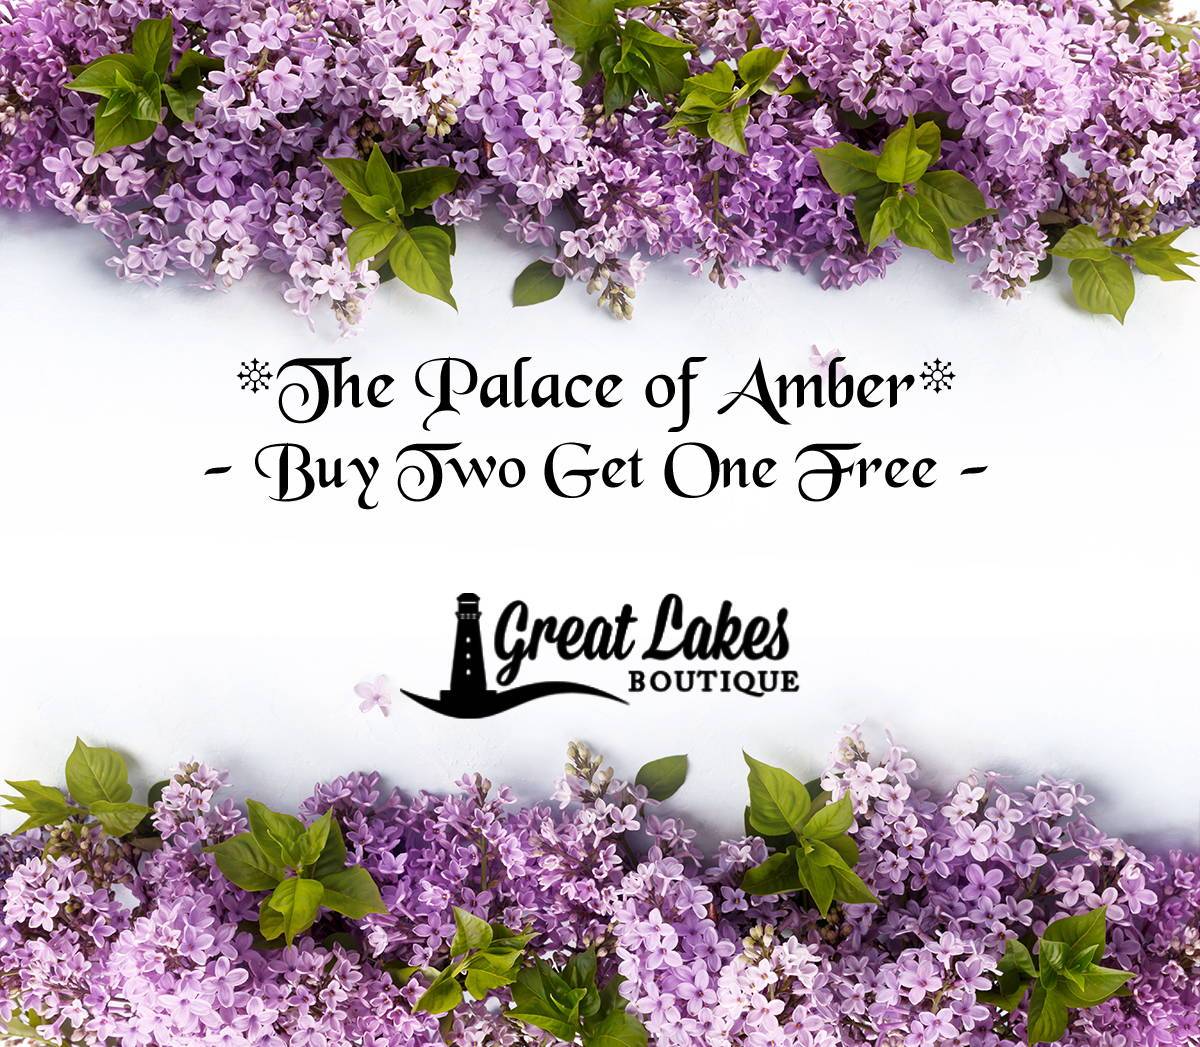 Buy Two Get One Free on The Palace of Amber